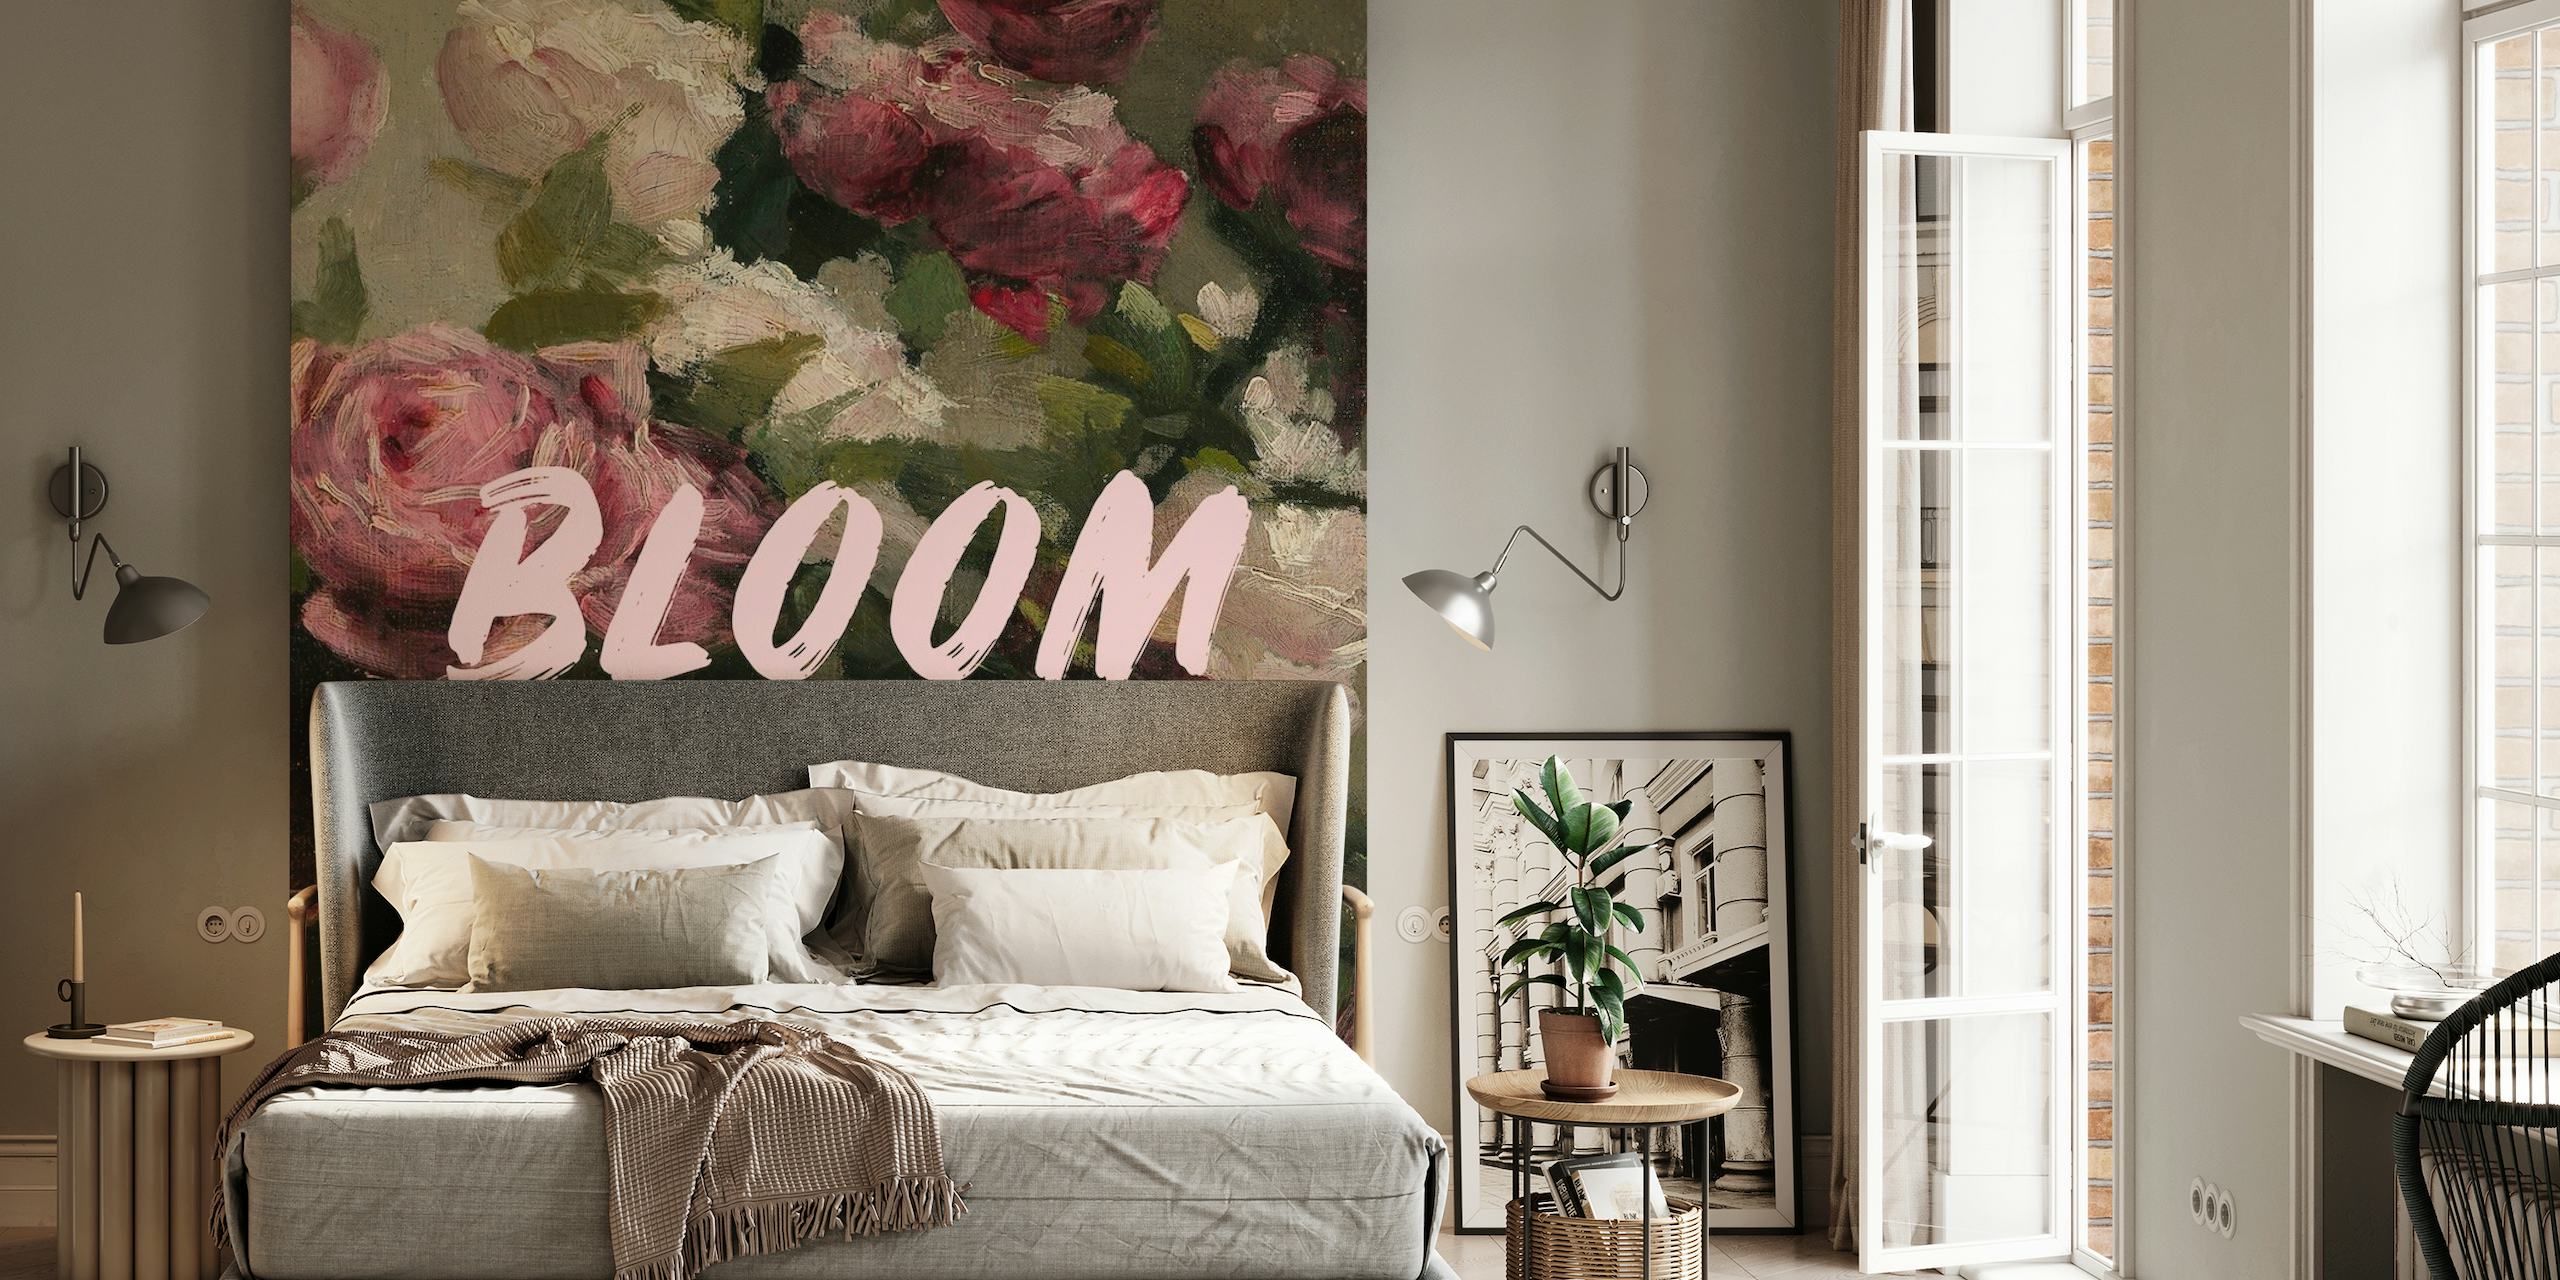 Elegant bloom floral wall mural with roses and lush greenery